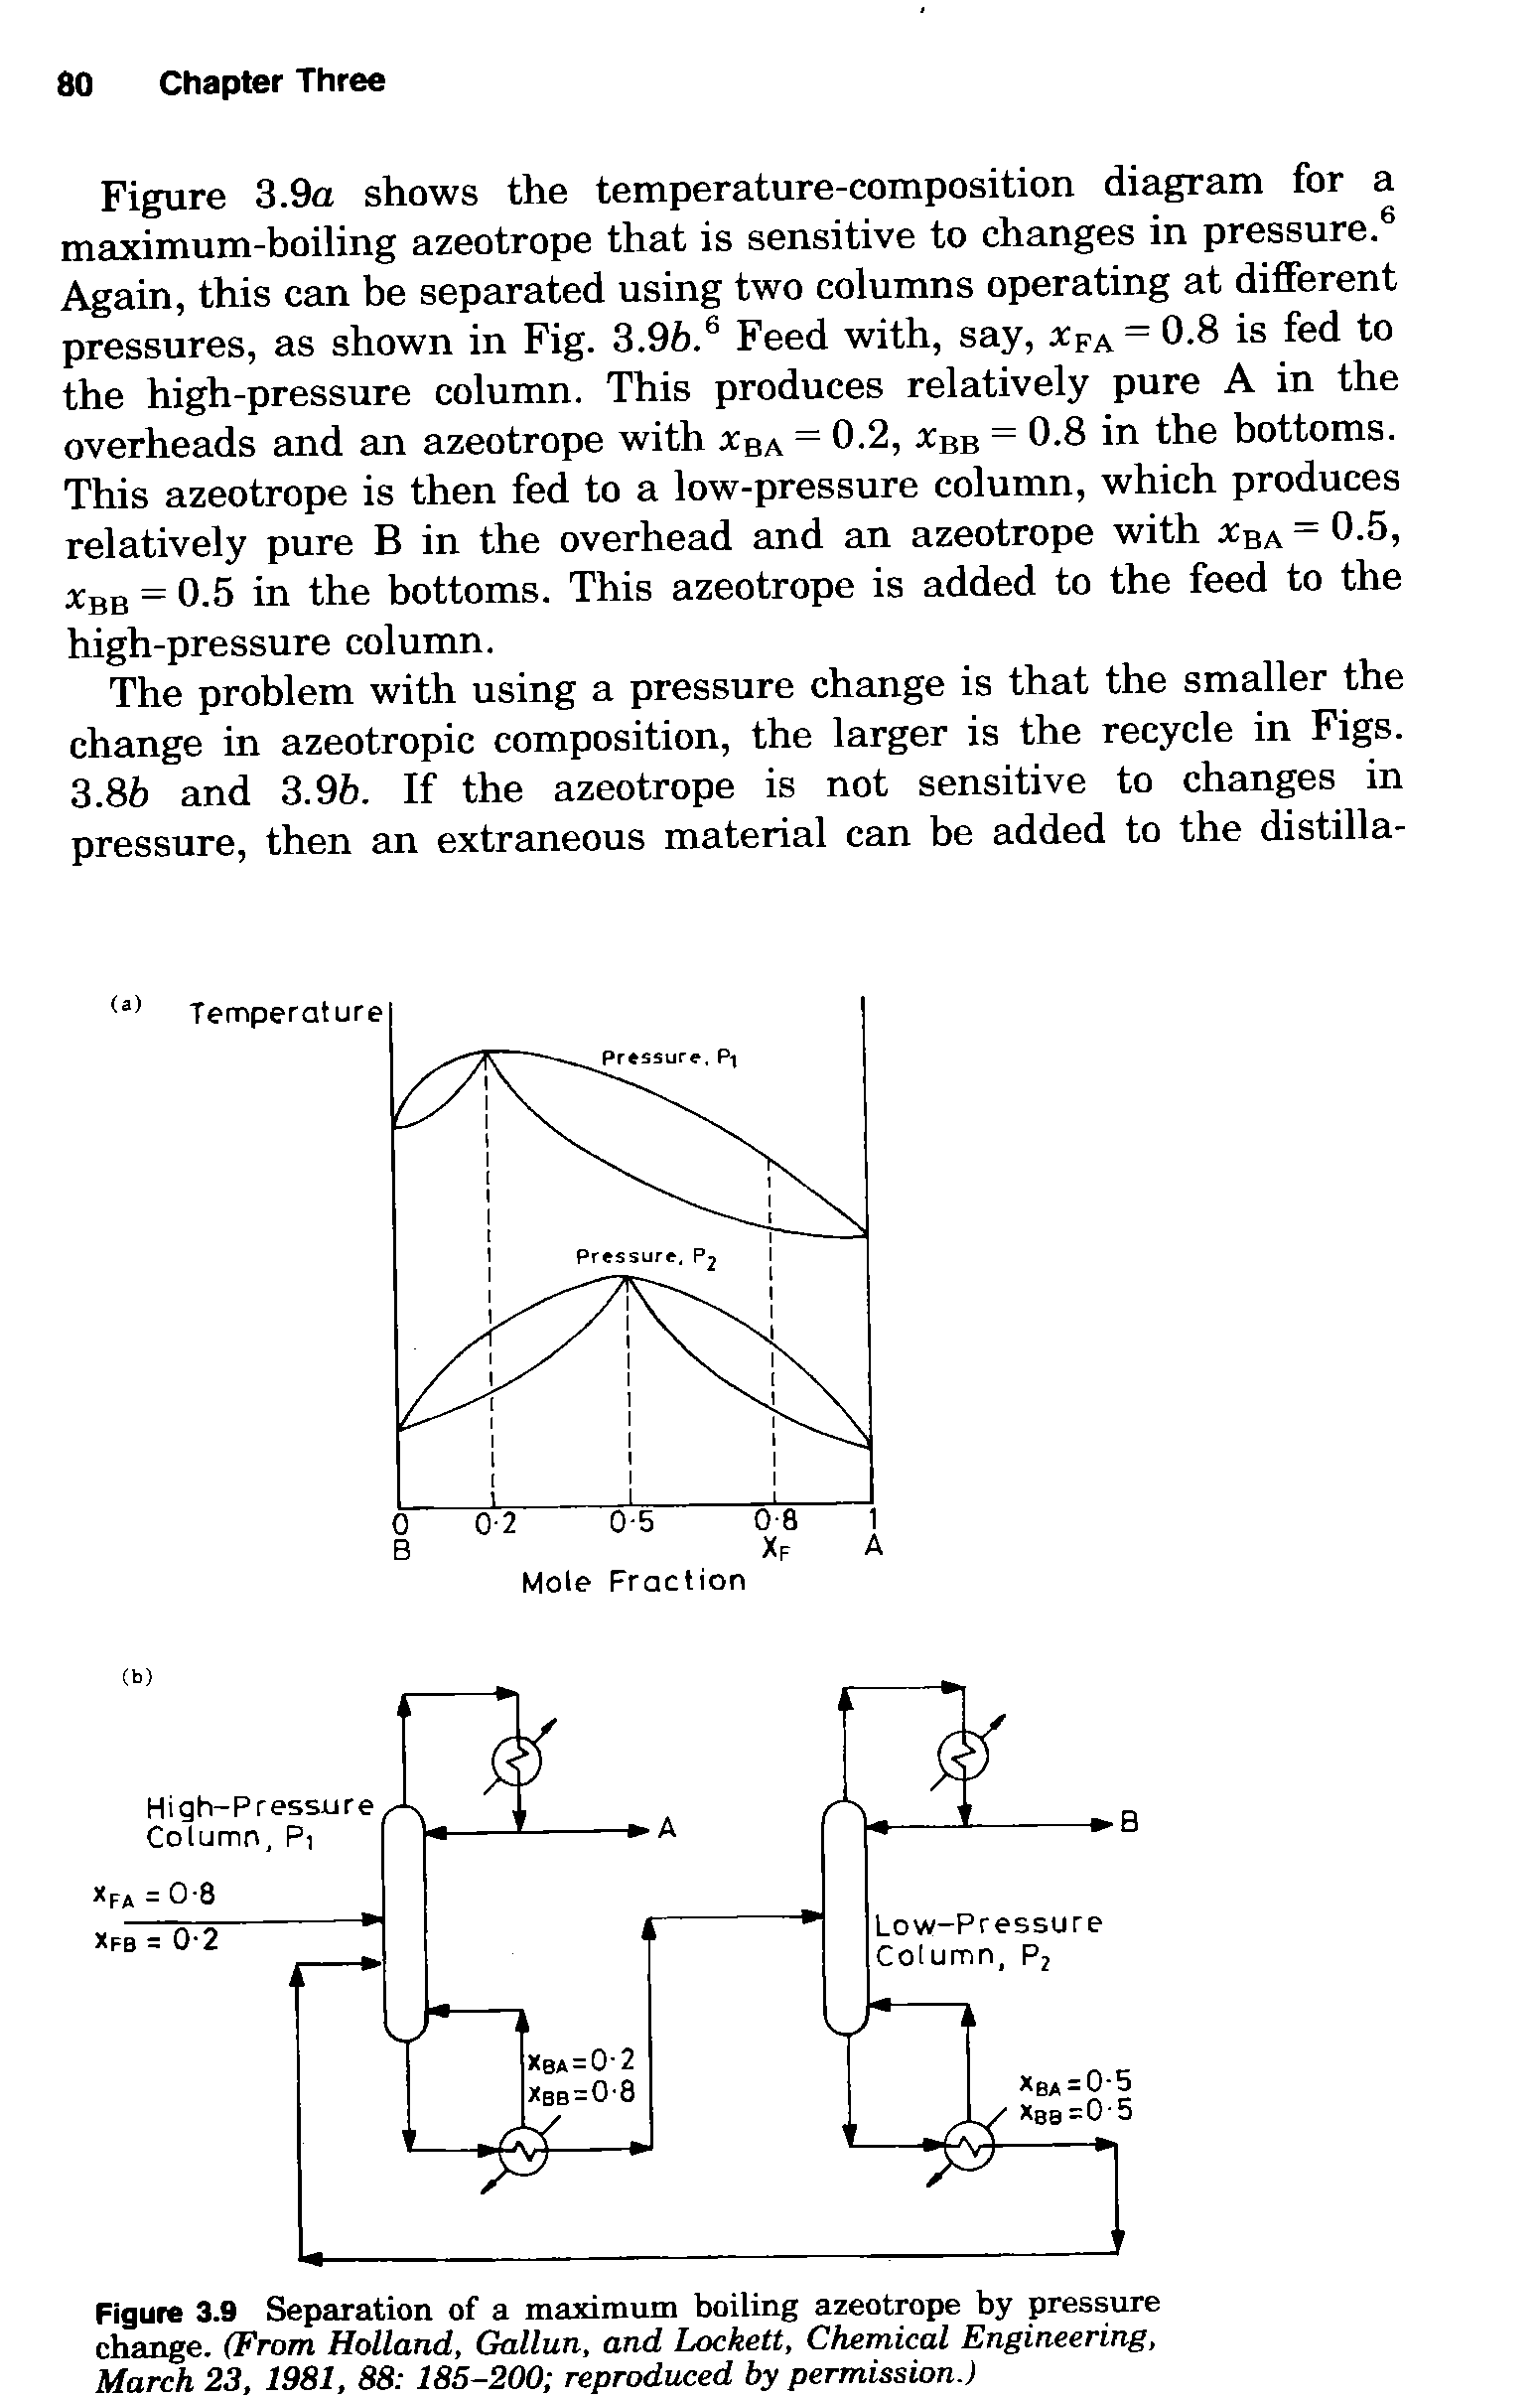 Figure 3.9 Separation of a maximum boiling azeotrope by pressure change. (From Holland, Gallun, and Lockett, Chemical Engineering, March 23, 1981, 88 185-200 reproduced by permission.)...